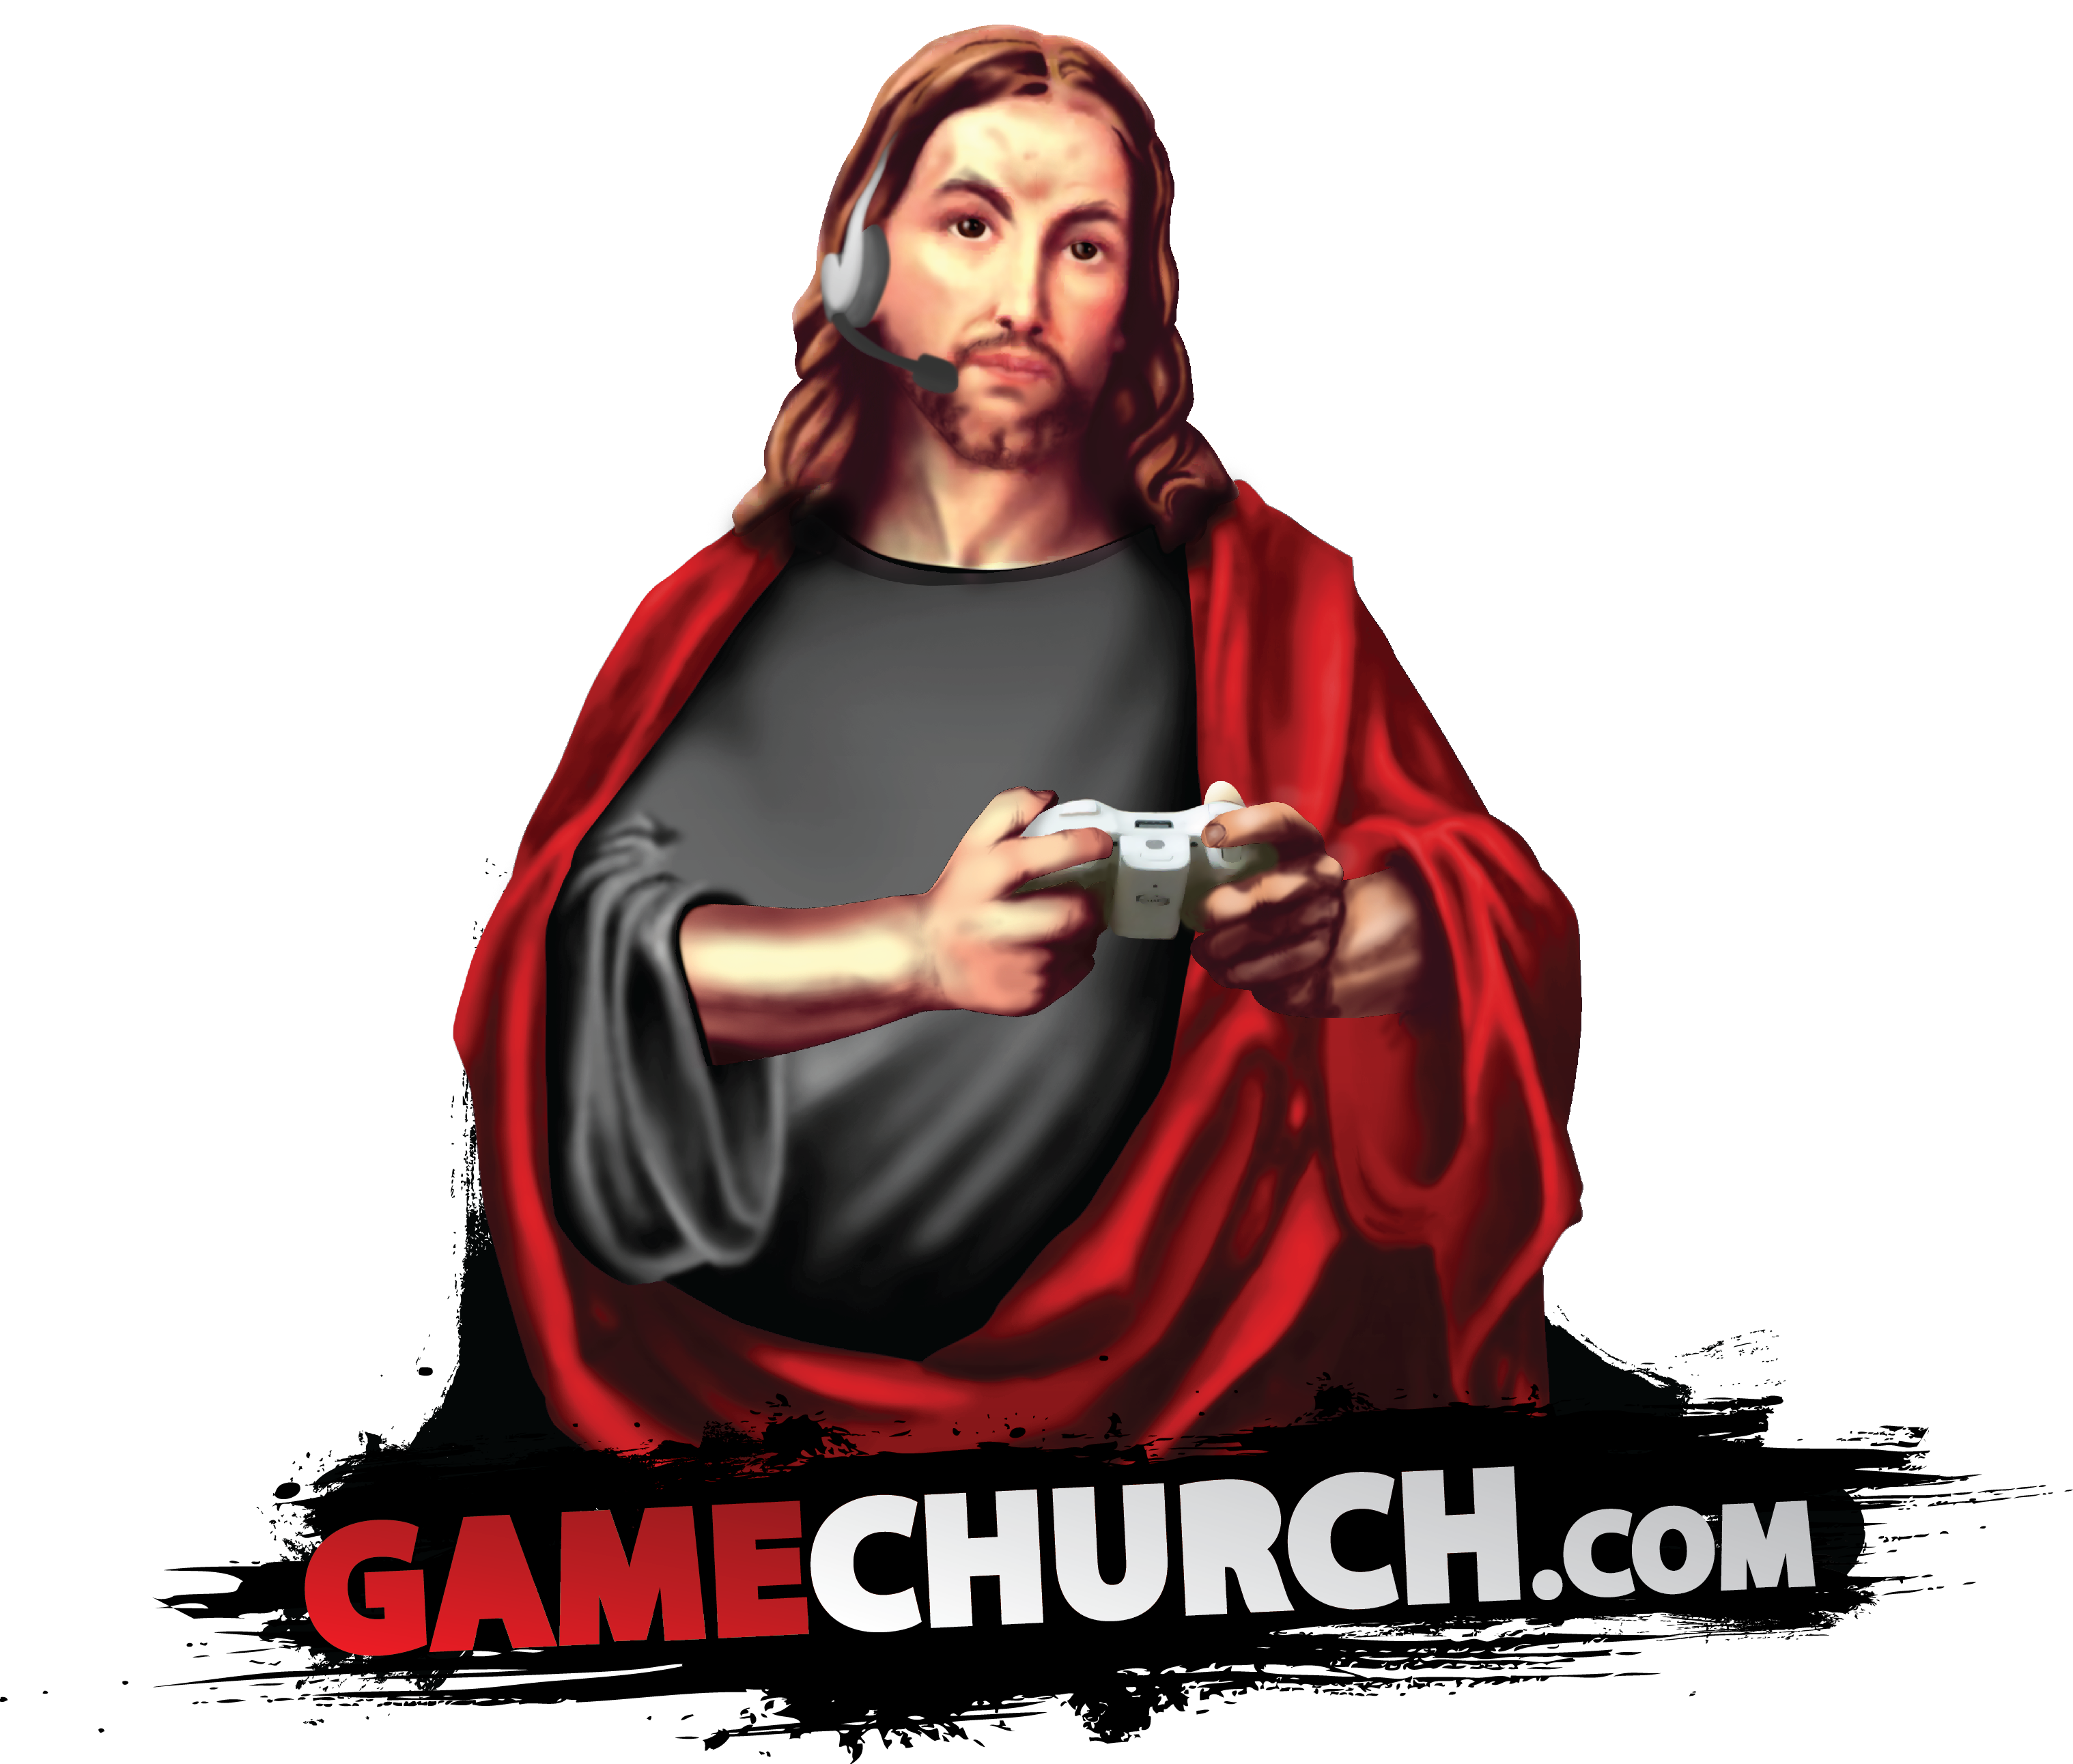 Depiction of Jesus Christ playing console video game for Gamechurch.com